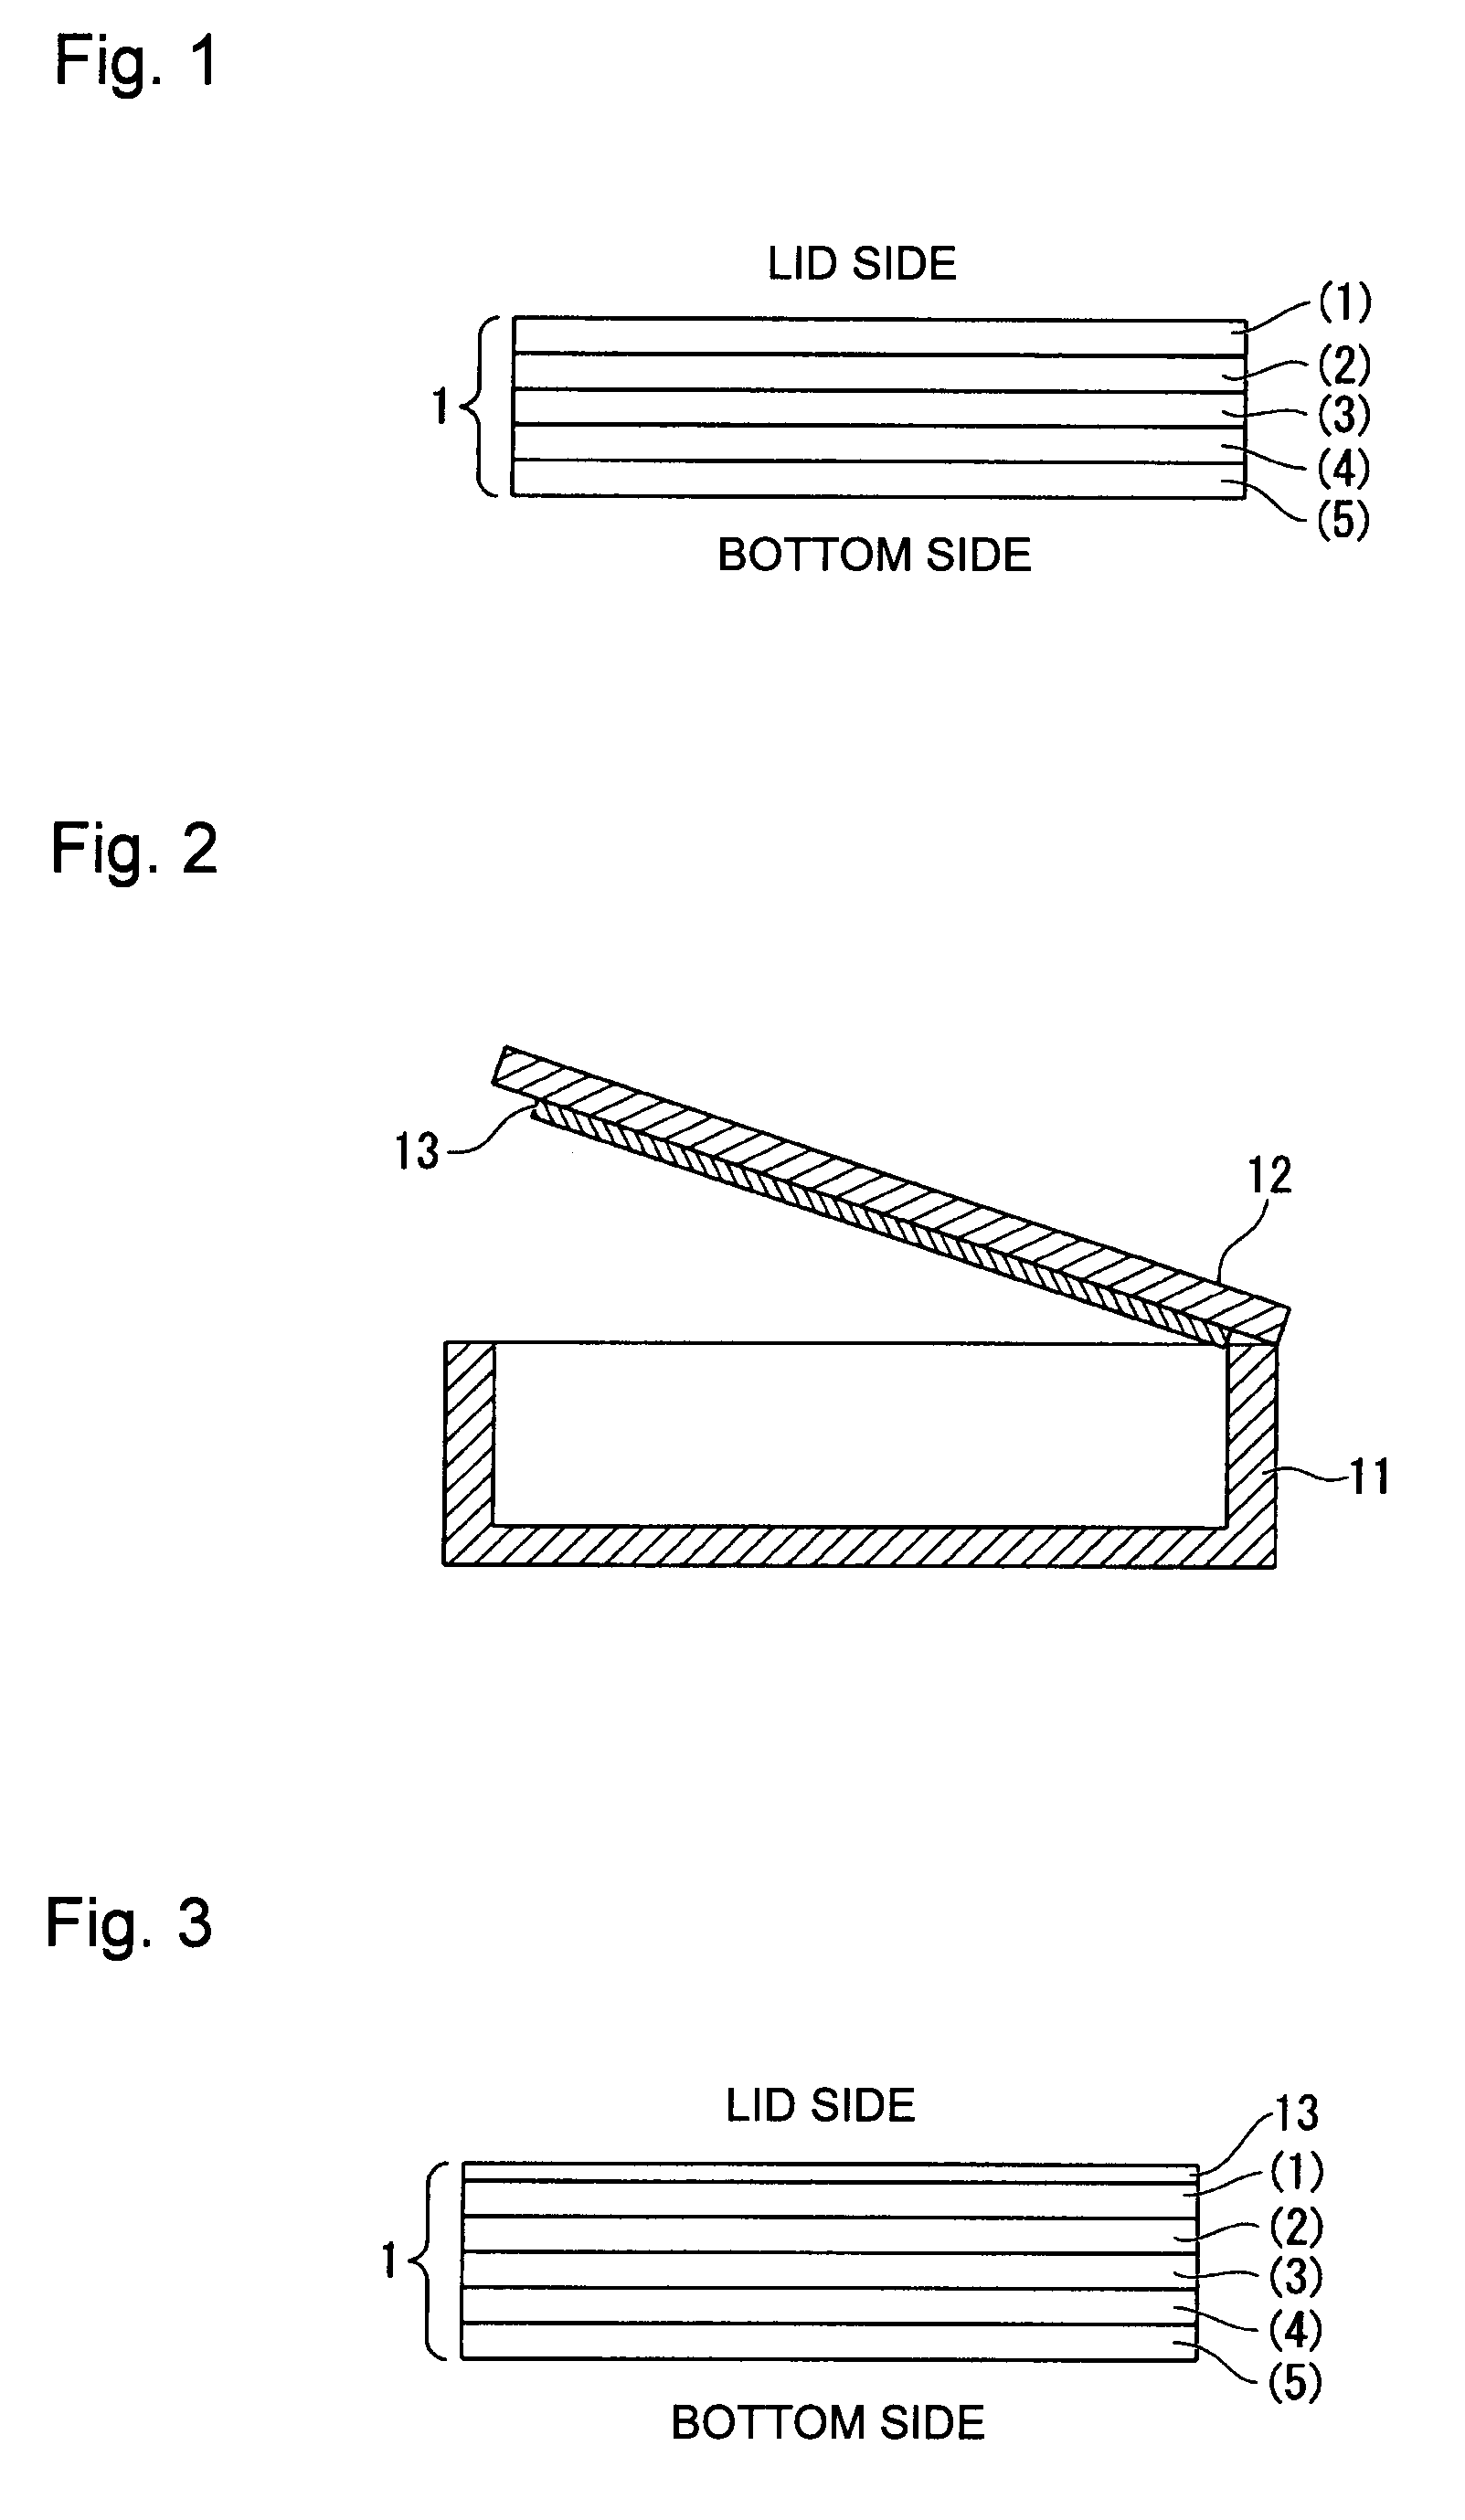 Process for producing flexible polyurethane foam and seat